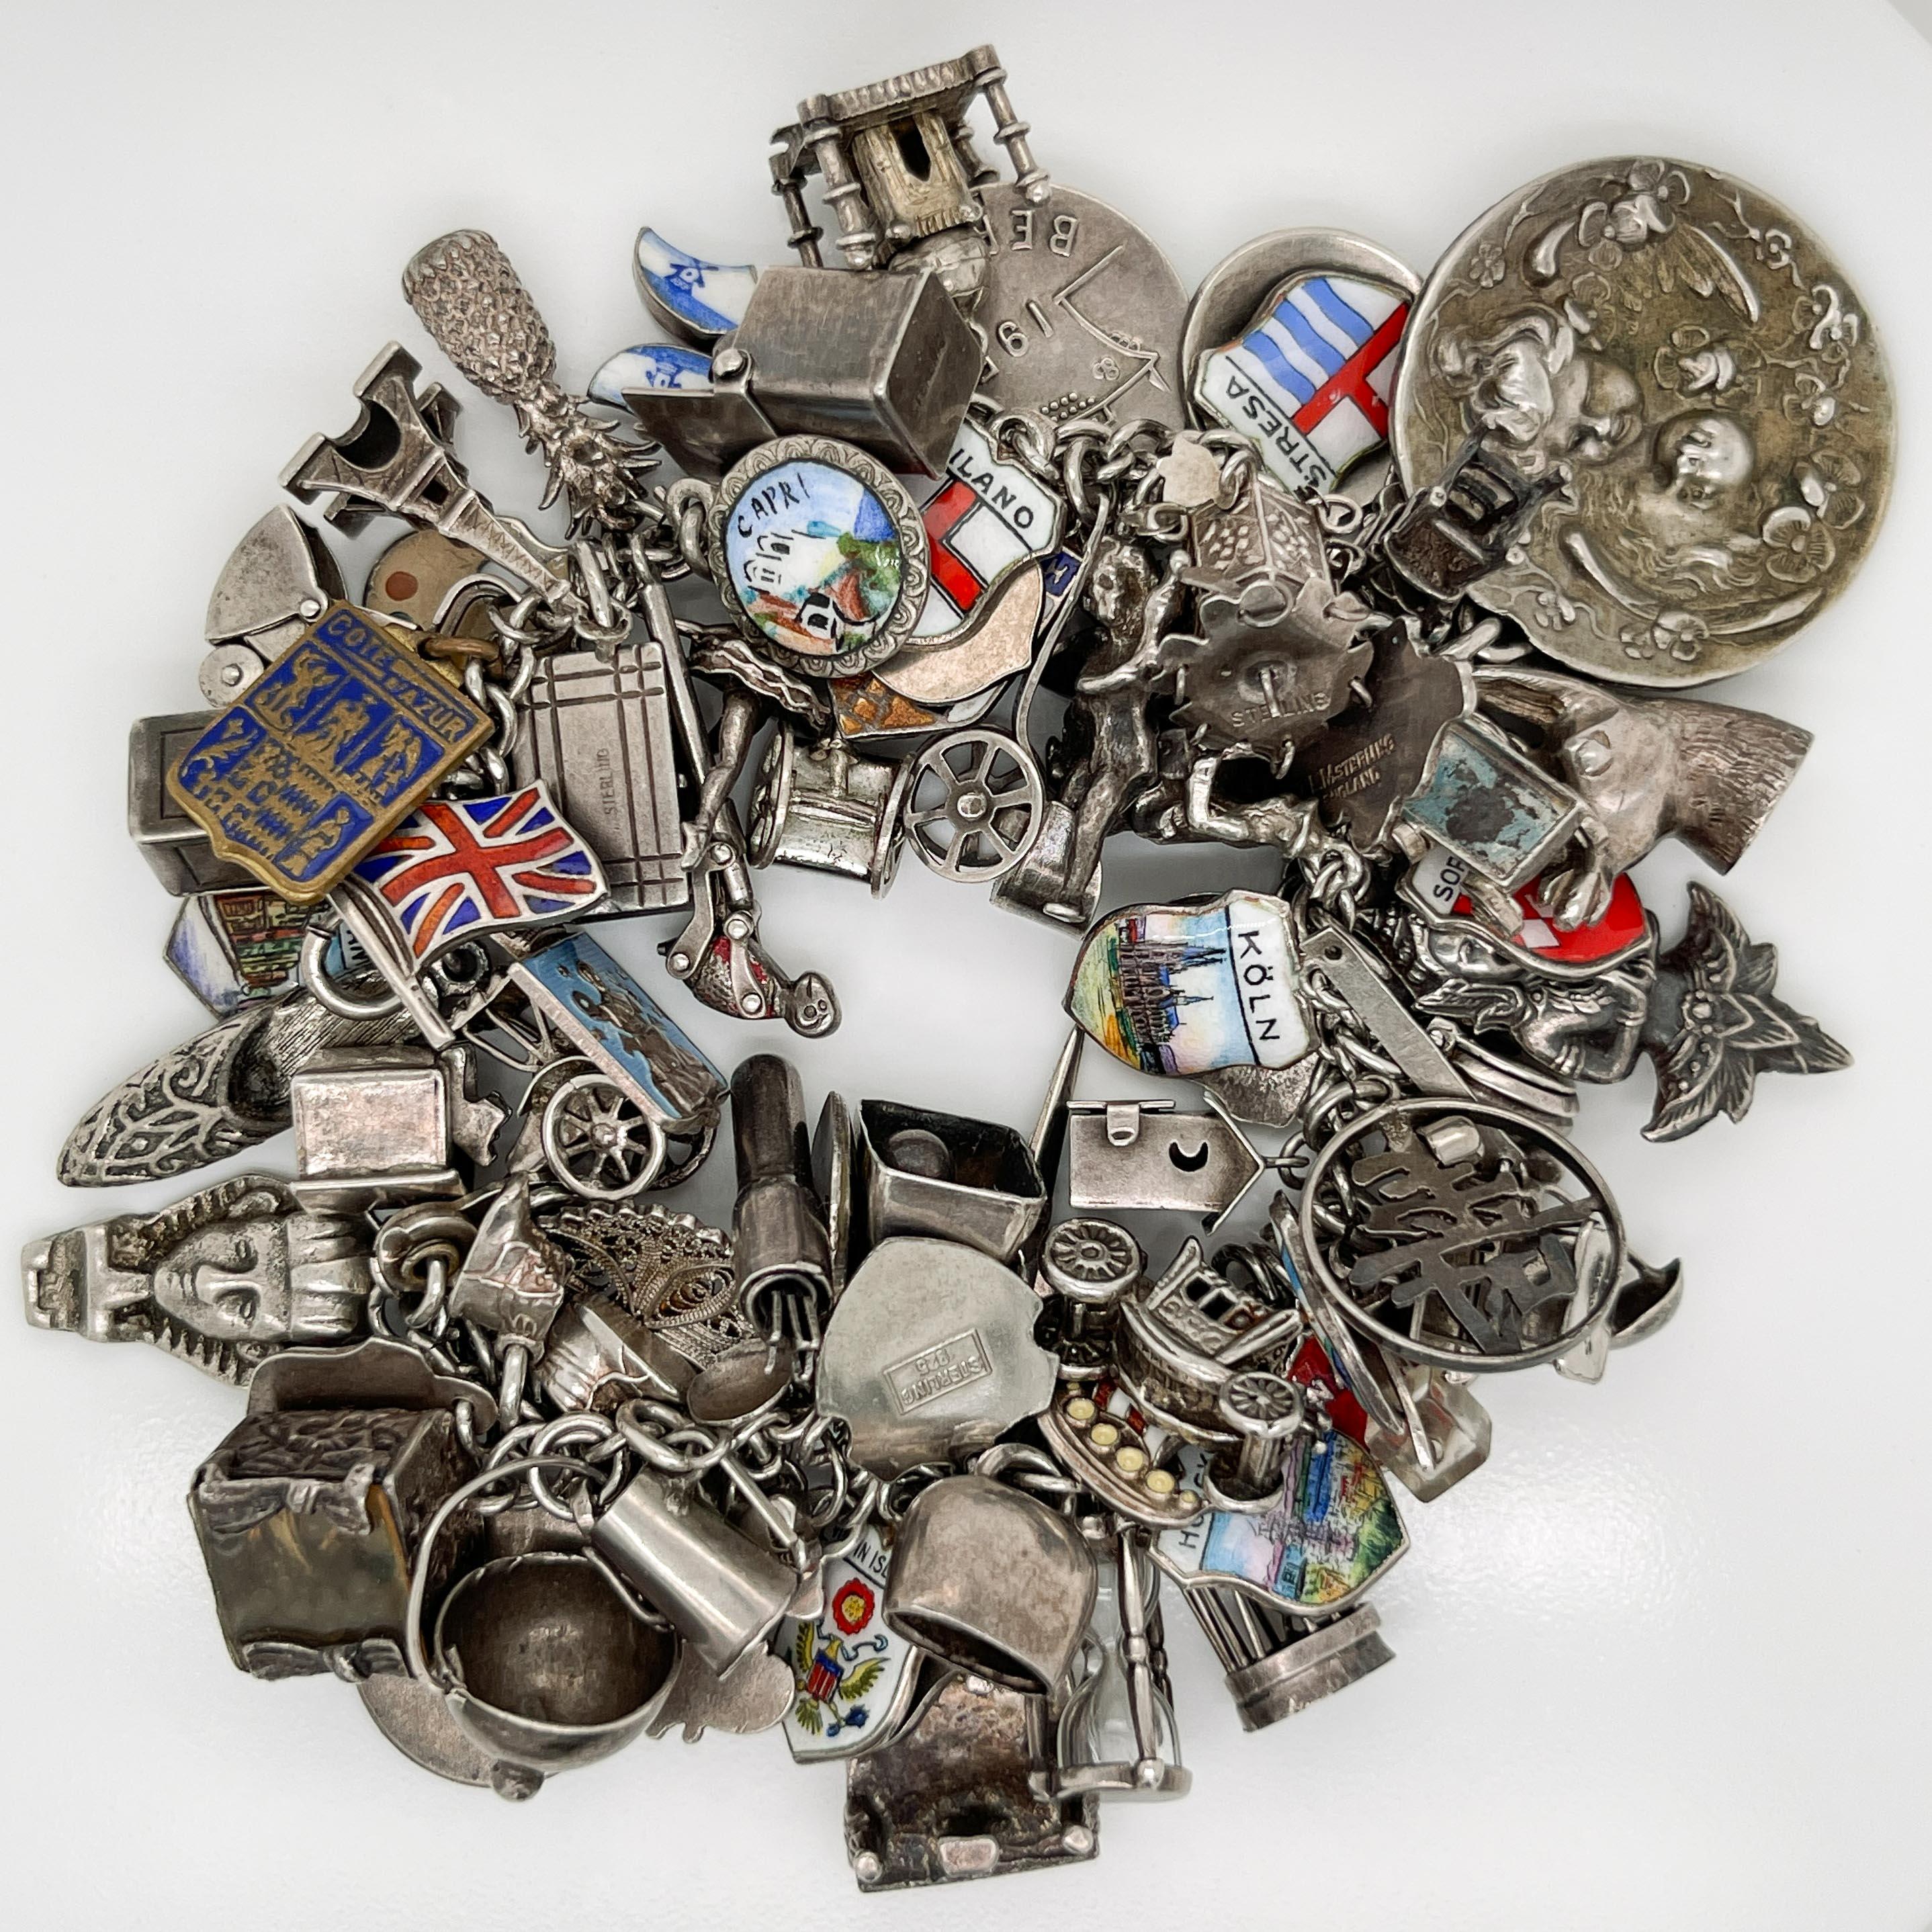 A fine, overflowing charm bracelet.

In sterling and 800 silver fineness.

With 70+ charms from around the world. 

Some of the rarest and most interesting charms include: a jack in the box, a diorama of person bathing, an out-house, an hourglass, a